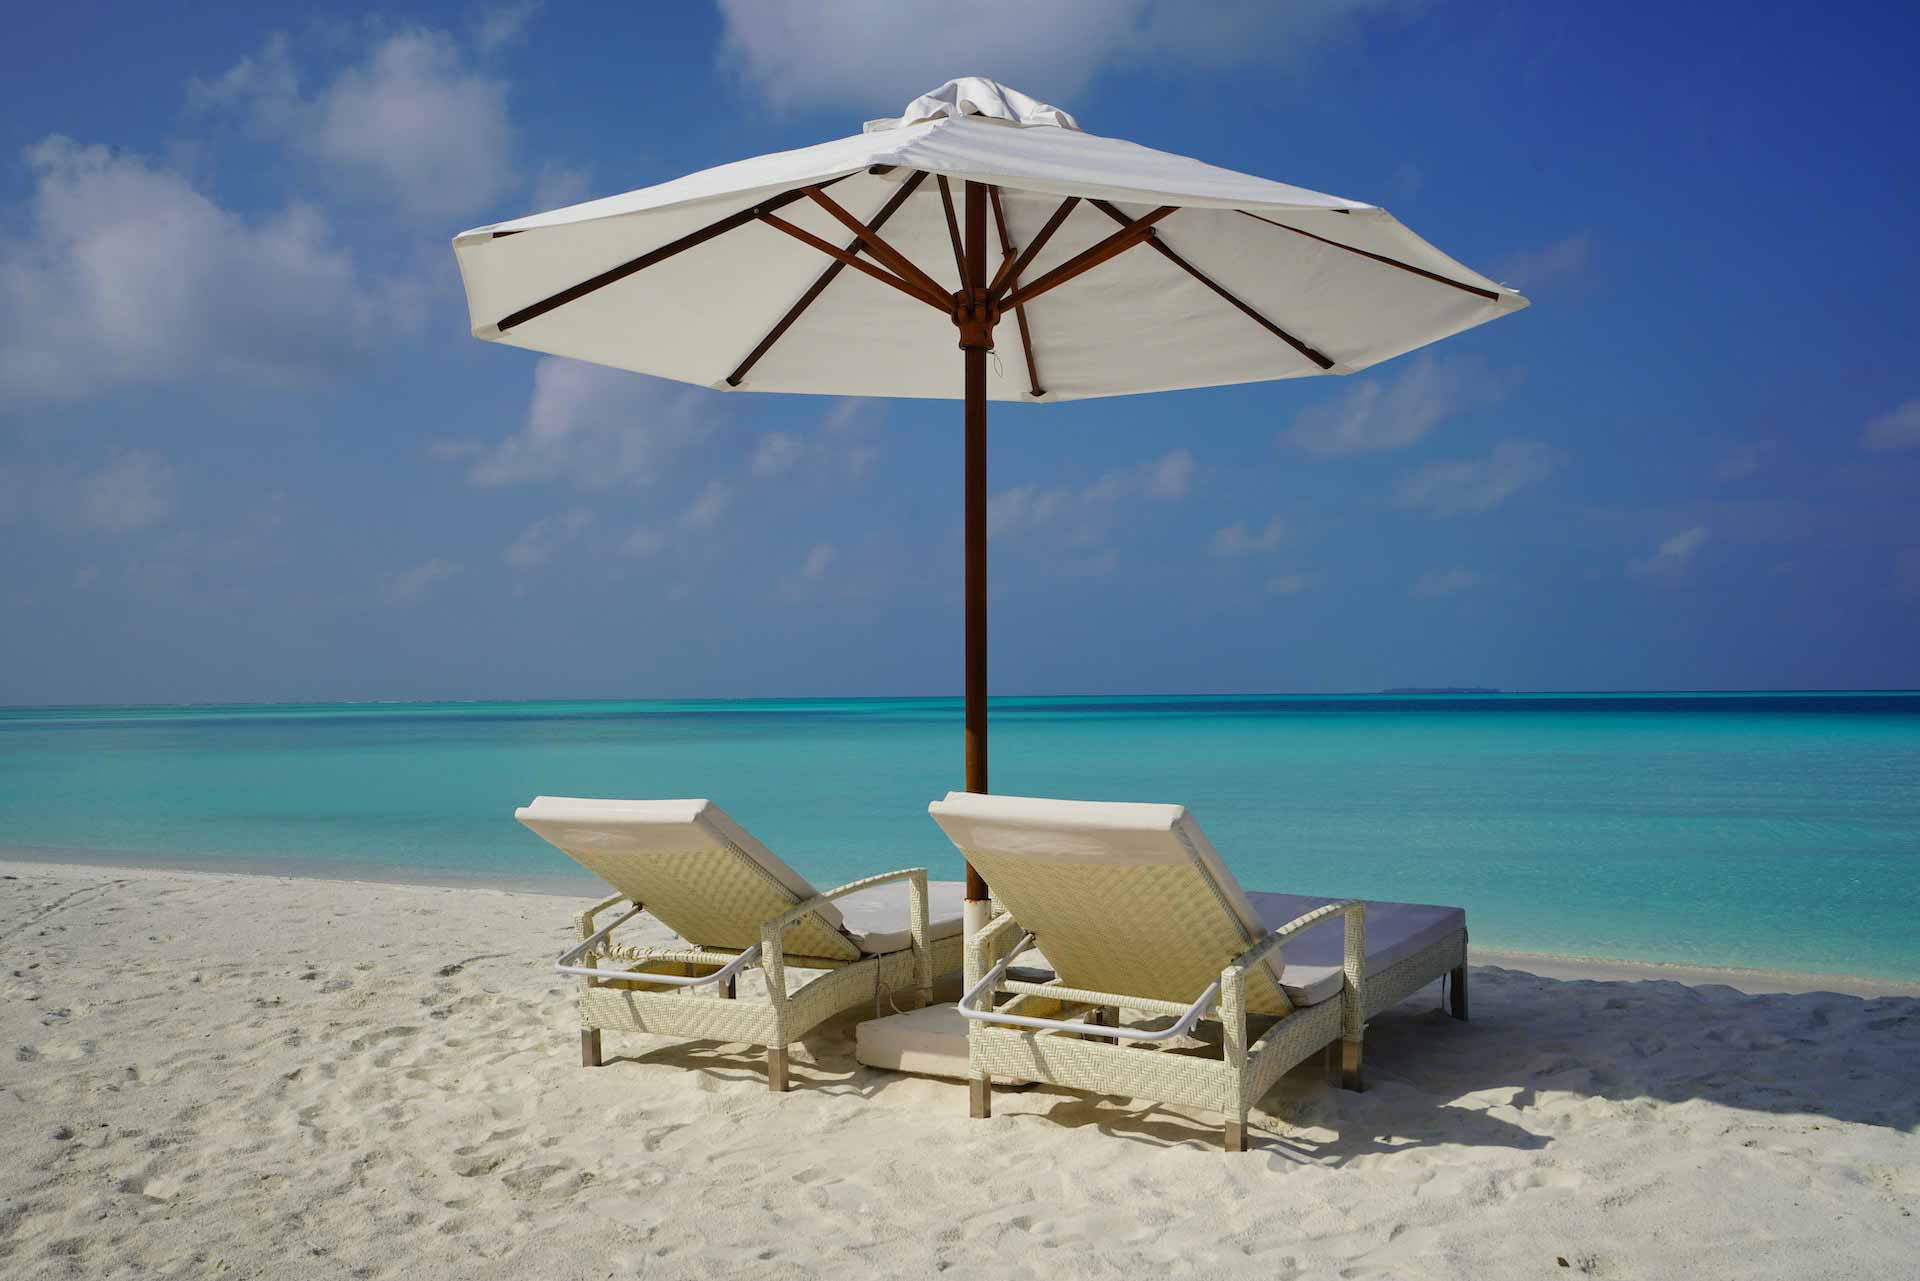 Two chairs under an umbrella on a beach